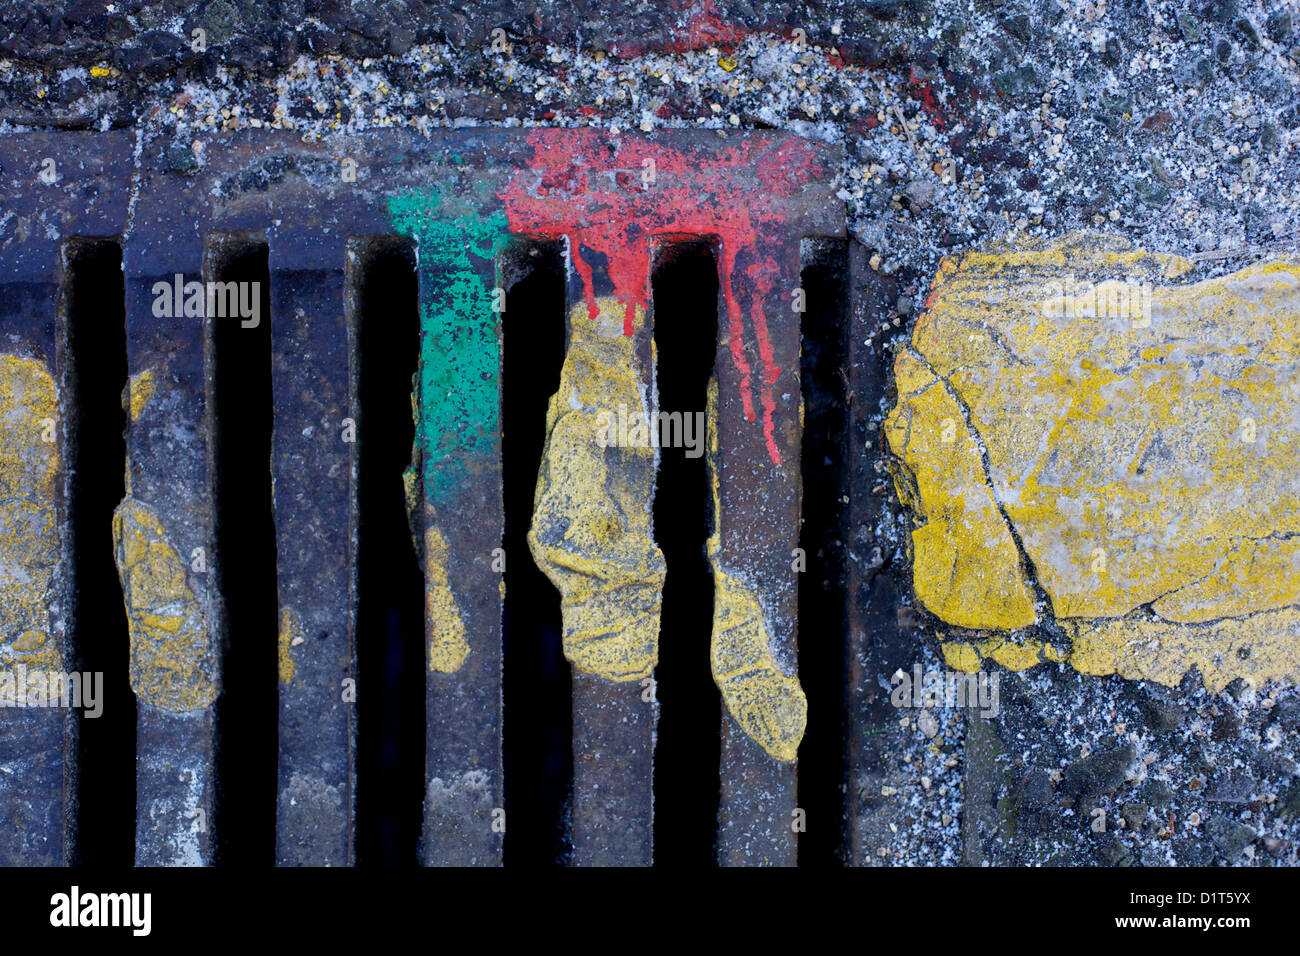 Roadside drain cover with red green and yellow paint Stock Photo